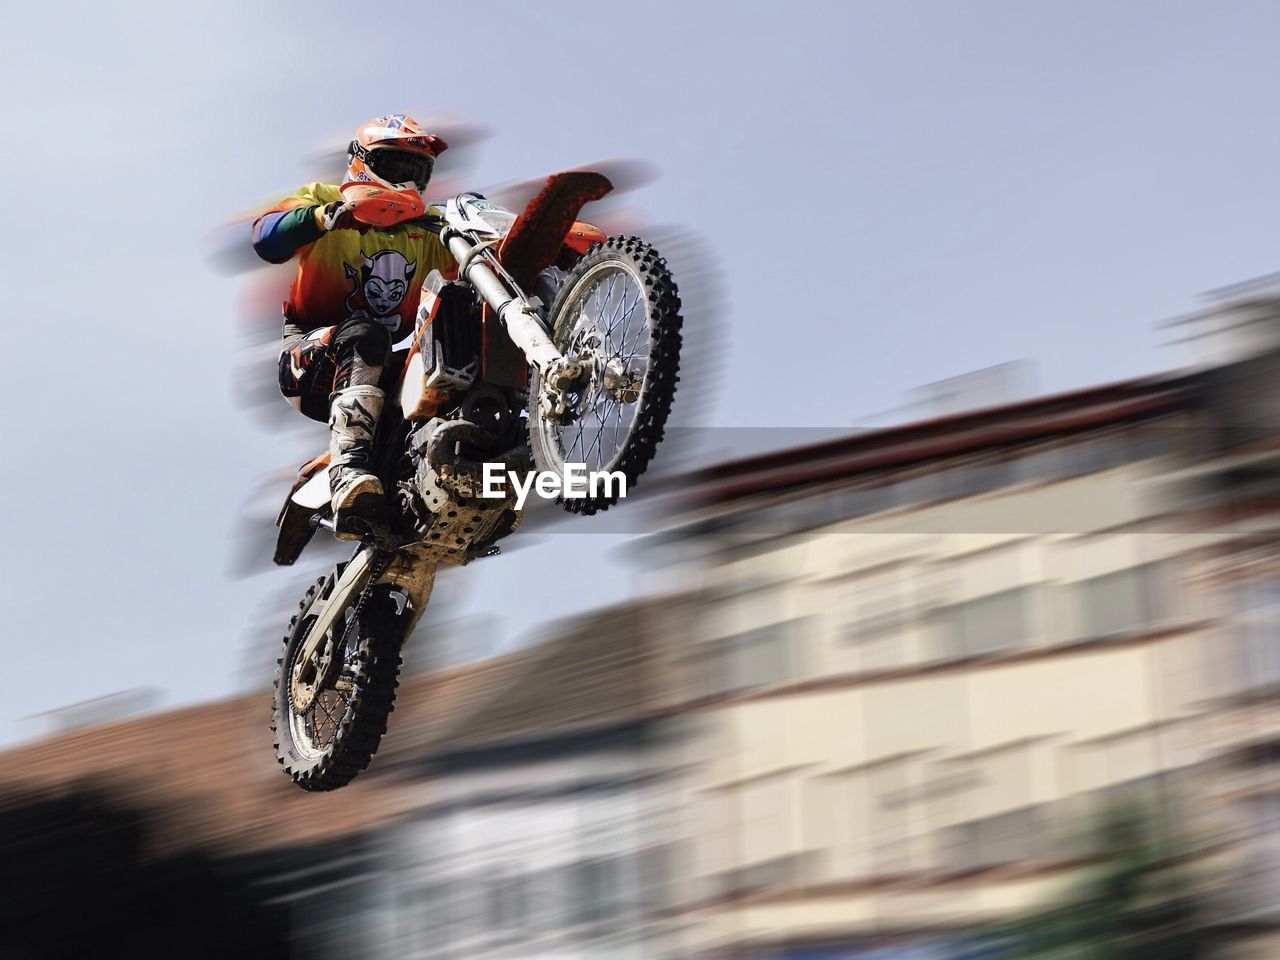 sports, motion, motocross, speed, transportation, blurred motion, racing, skill, stunt, motorcycle racing, extreme sports, motorsport, competition, mid-air, jumping, mode of transportation, activity, headwear, one person, competitive sport, sports race, motorcycle, risk, helmet, warning sign, vehicle, adult, sports helmet, communication, riding, full length, sign, sports equipment, athlete, men, bicycle, nature, enduro, person, outdoors, performance, land vehicle, track and field event, driving, day, leisure activity, adventure, joy, professional sport, sports track, expertise, recreation, lifestyles, exhilaration, sports clothing, biker